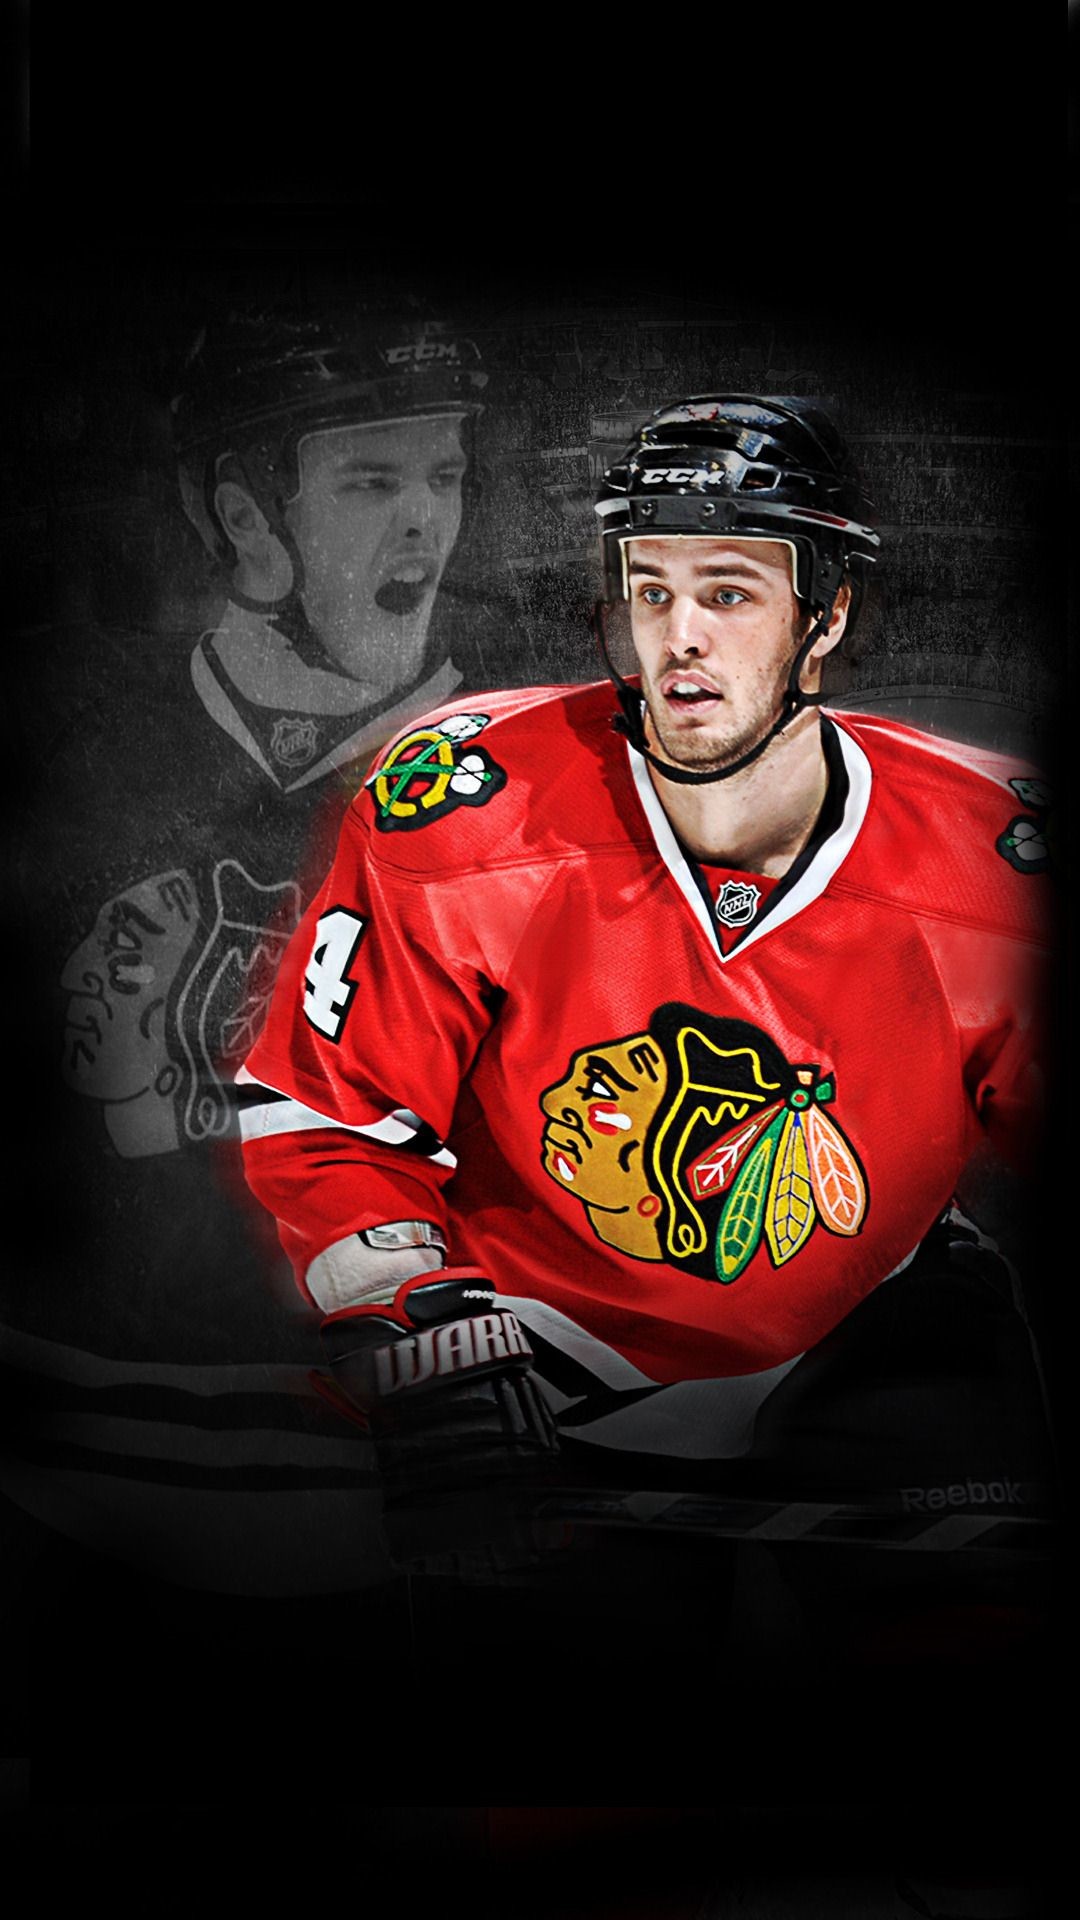 1080x1920 Chicago blackhawks wallpaper android download